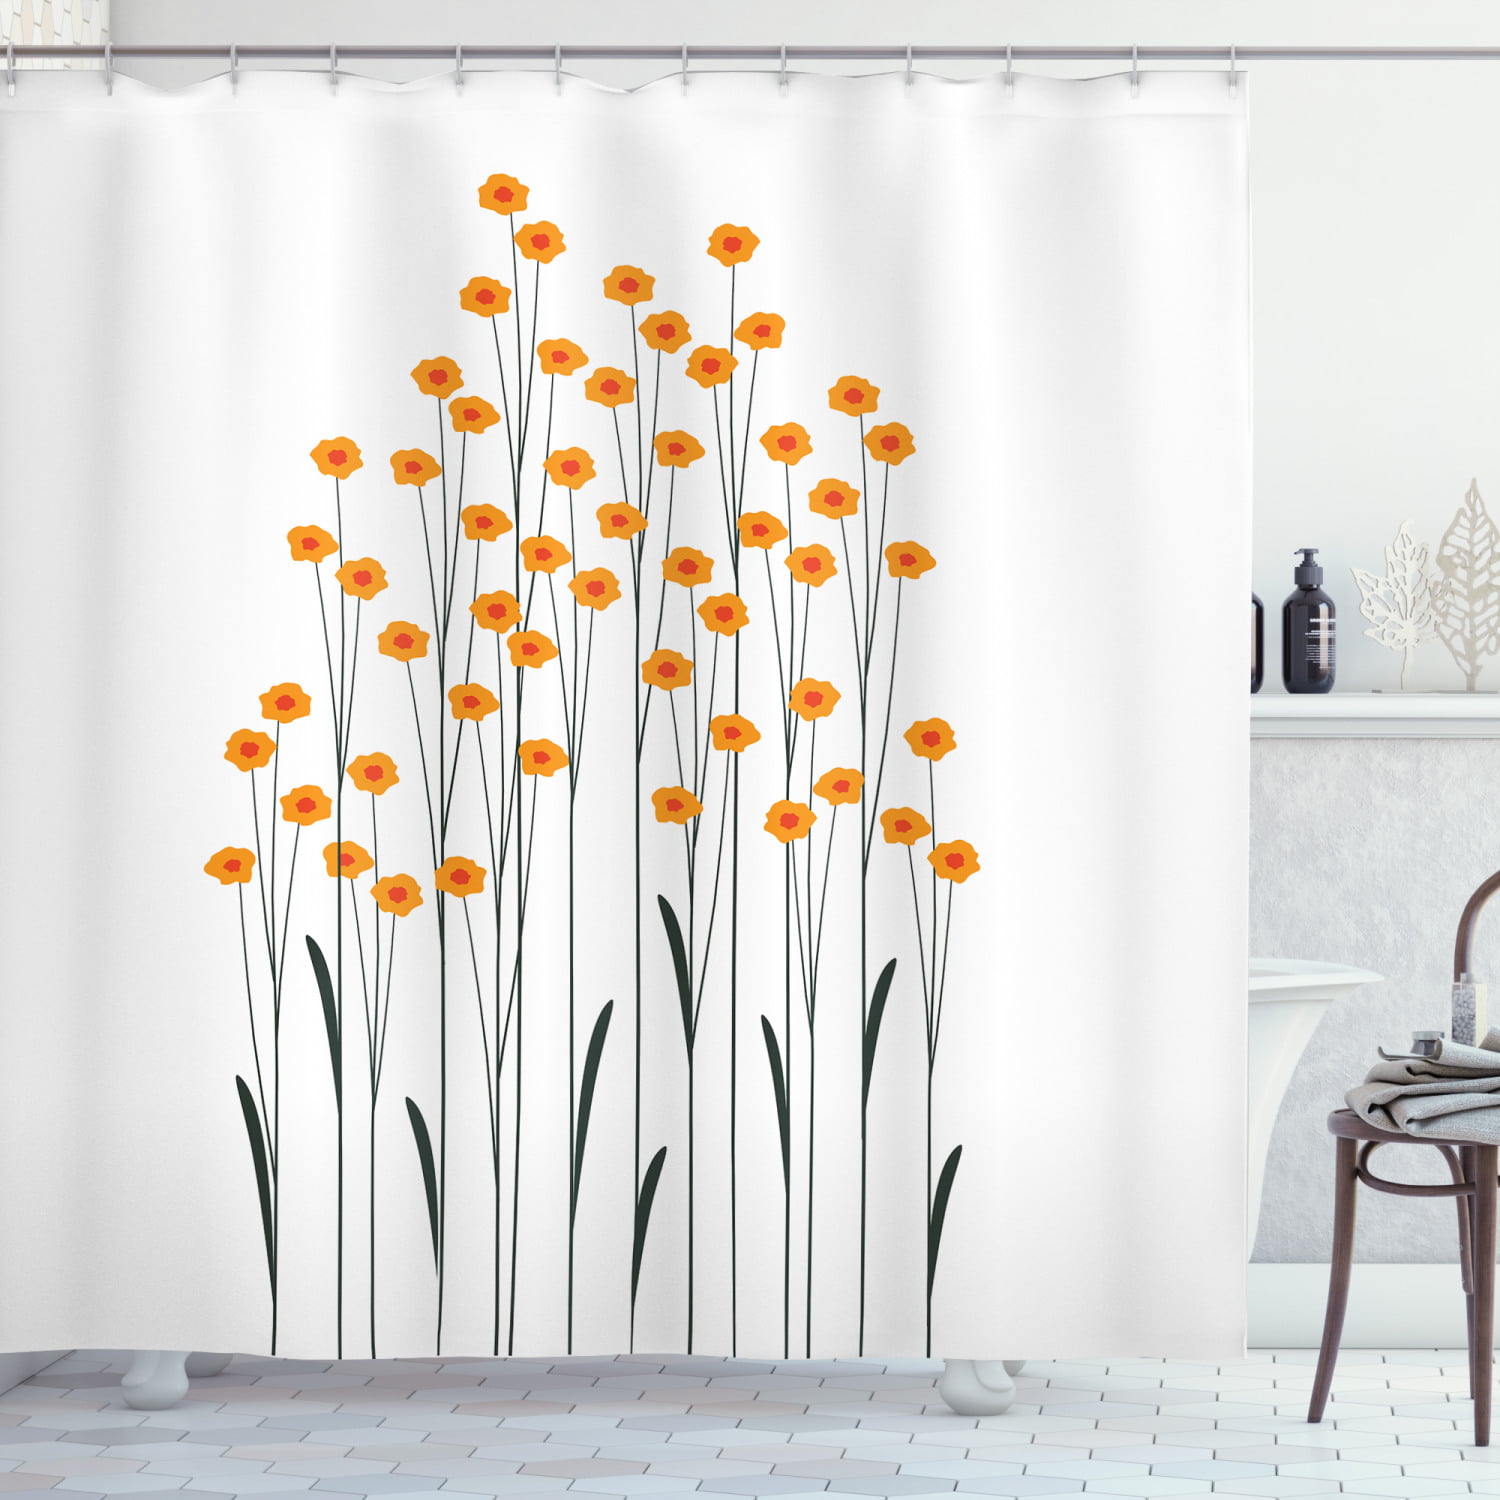 Curtain Printed Photo Curtain "Orchid" Curtain with Motif Digital Printing to measure 